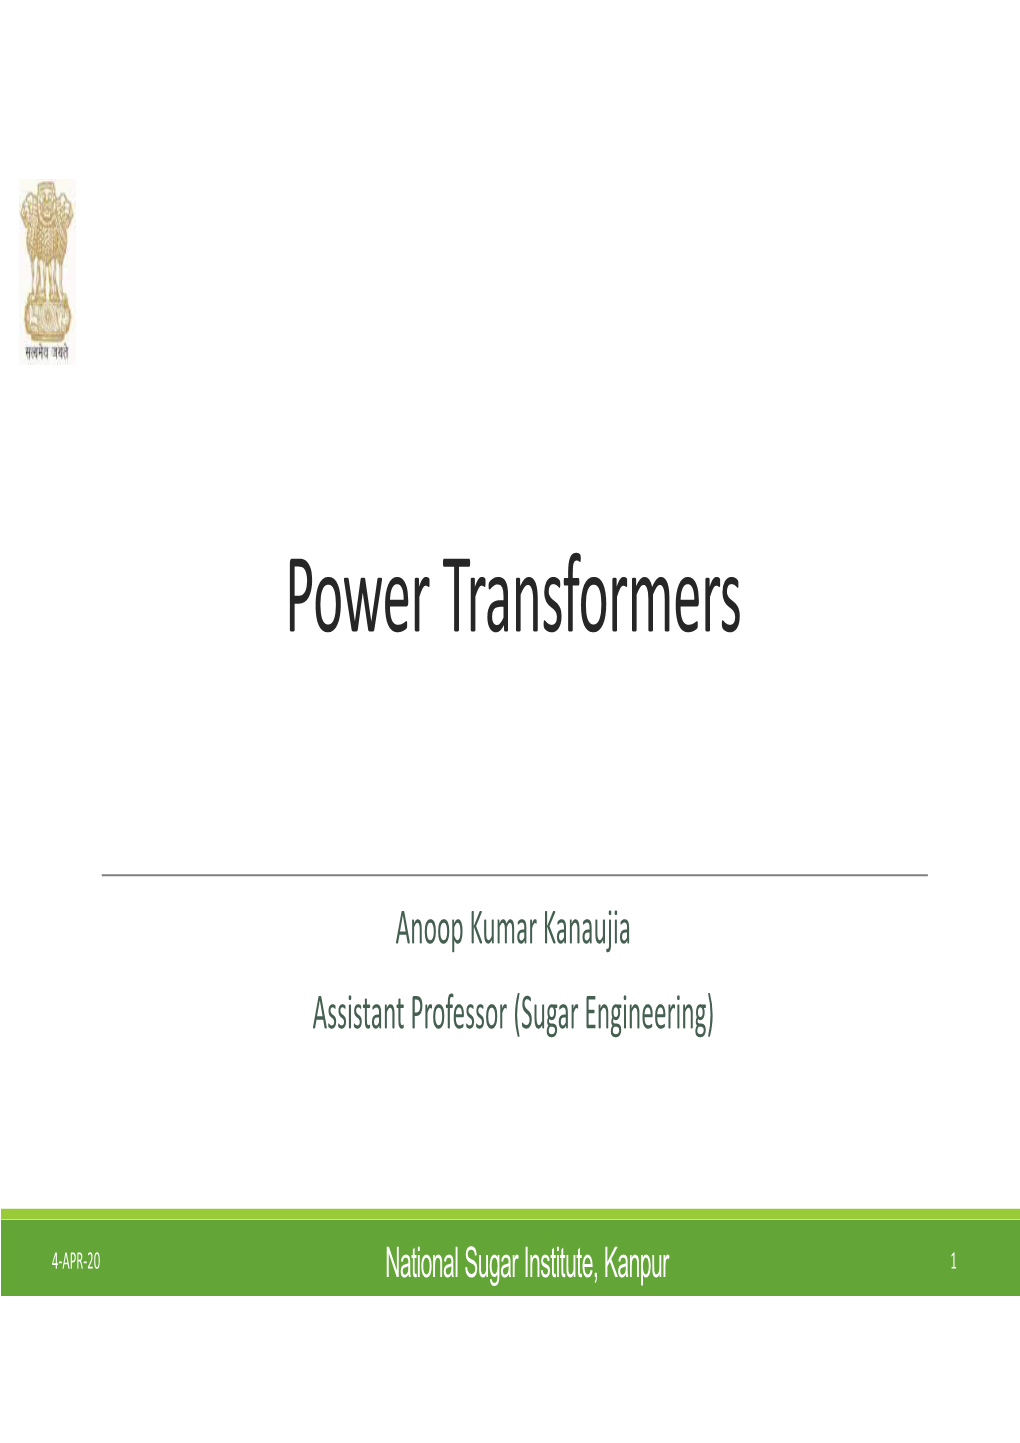 ANSI (ST)-I Year: Power Transformers